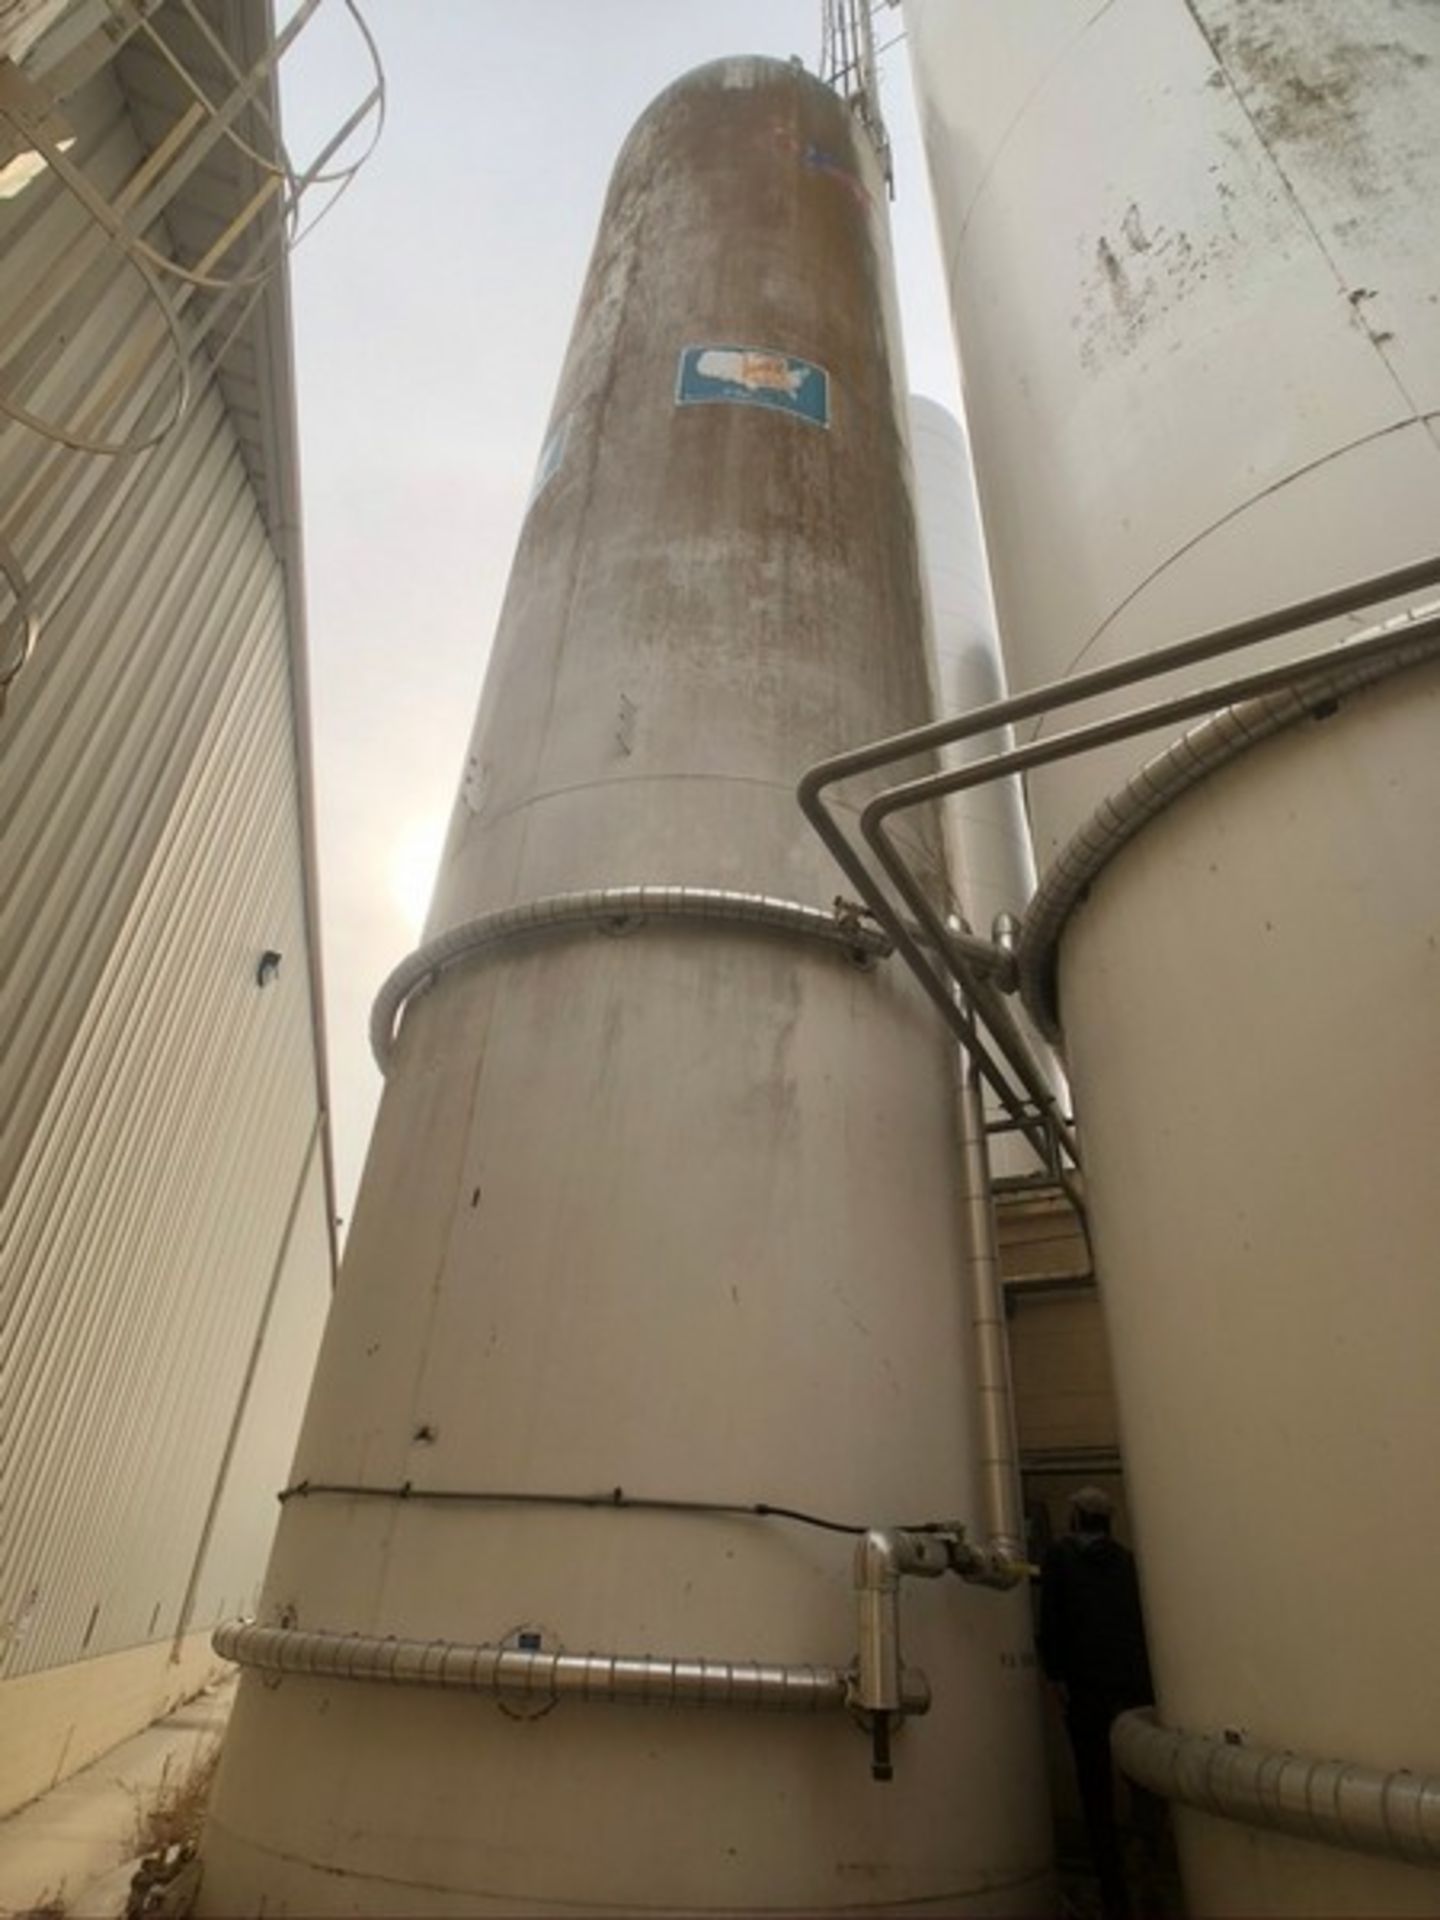 MUELLER 40,000 GALLON JACKETED SILO, S/N D-27114 (RIGGING, SITE MANAGEMENT AND LOADING FEE $8,220. - Image 4 of 29